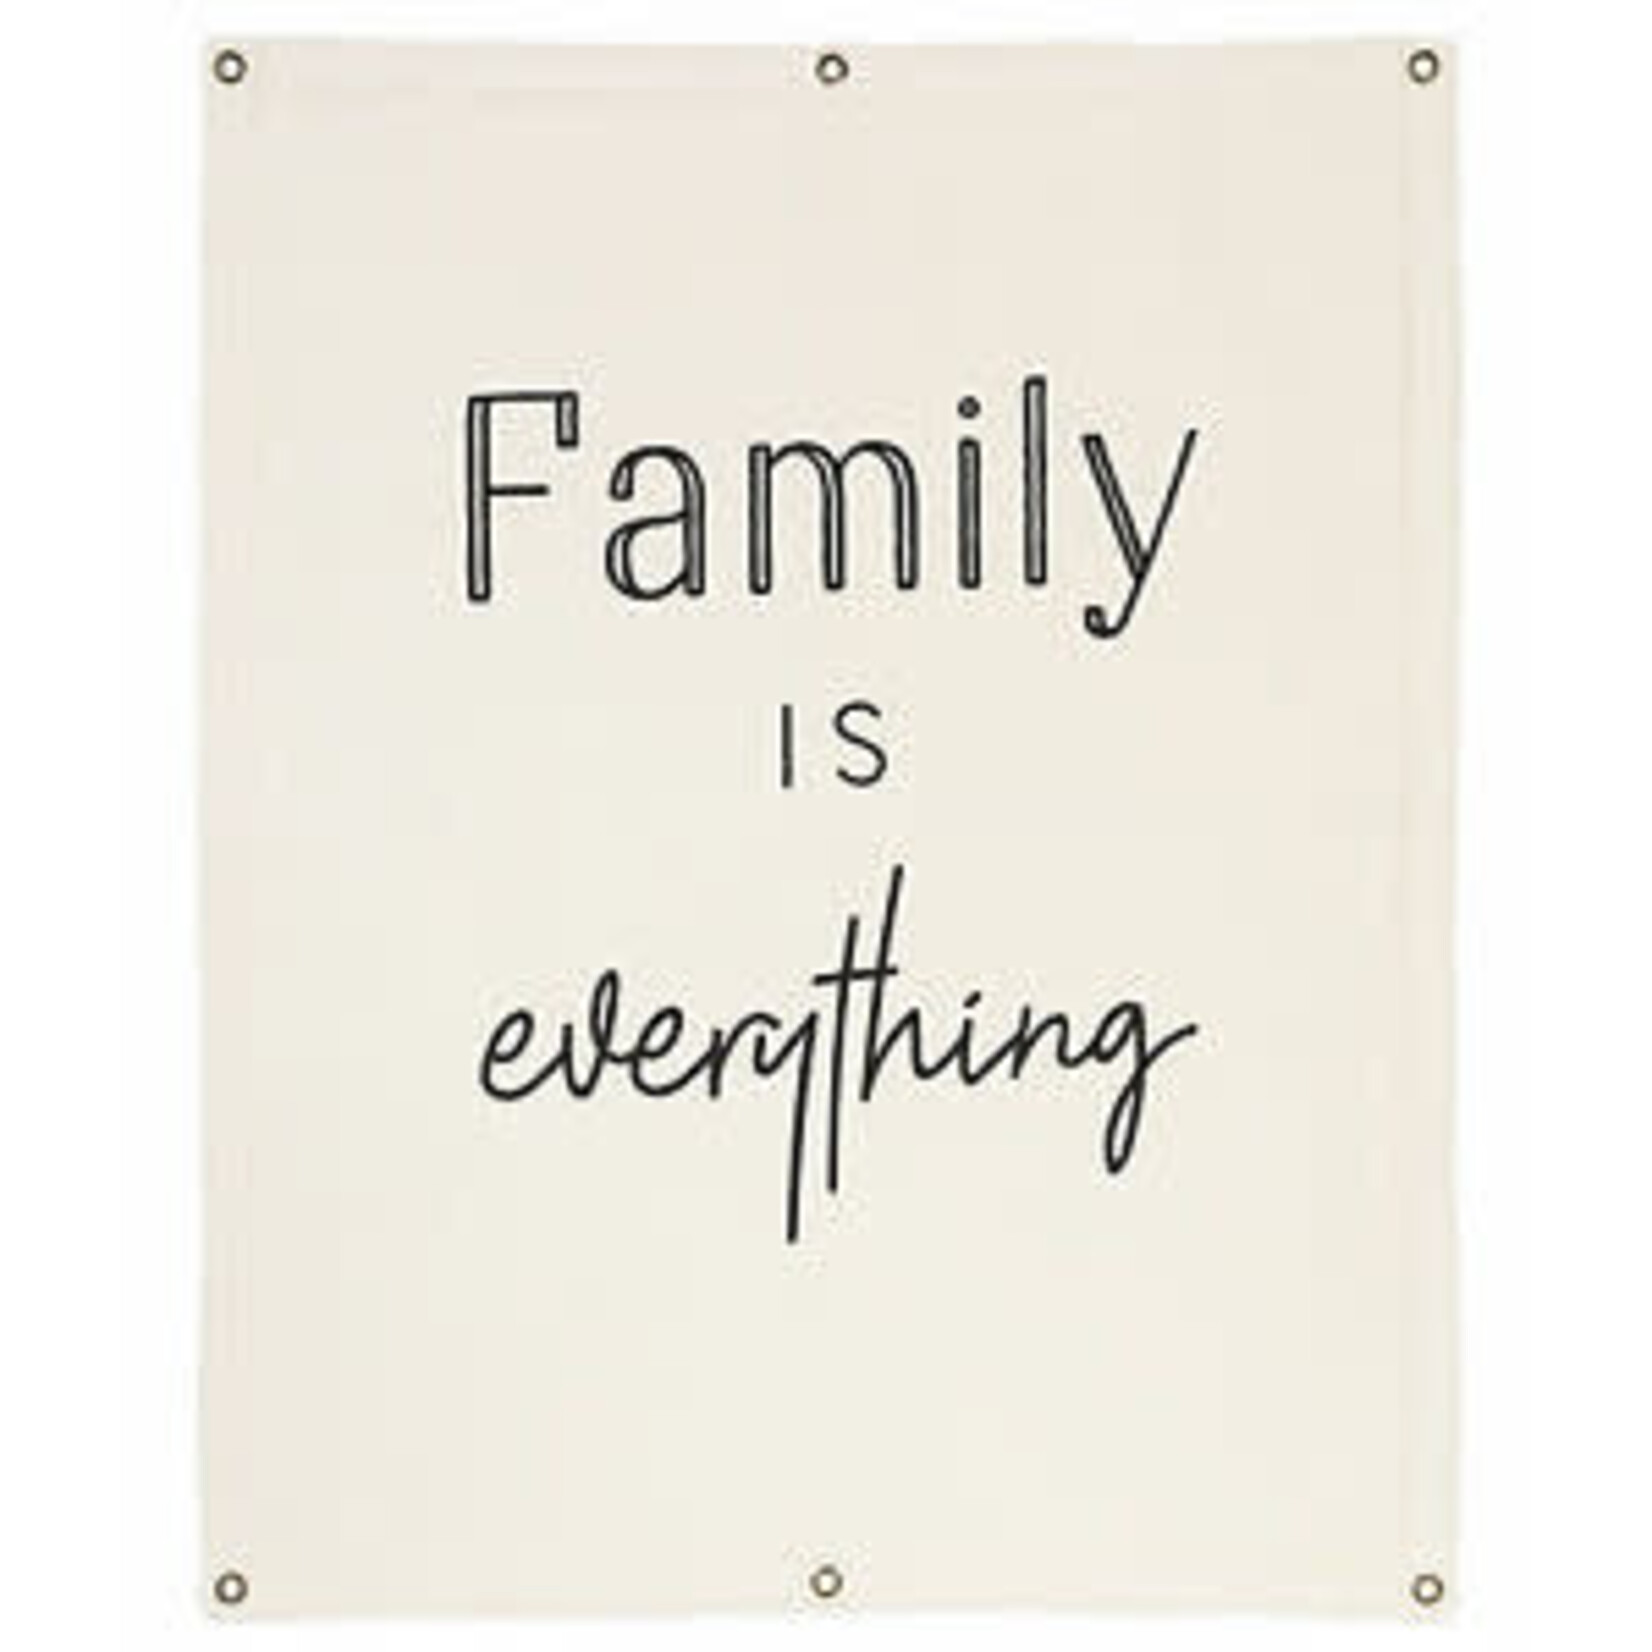 Ganz Family is Everything Banner